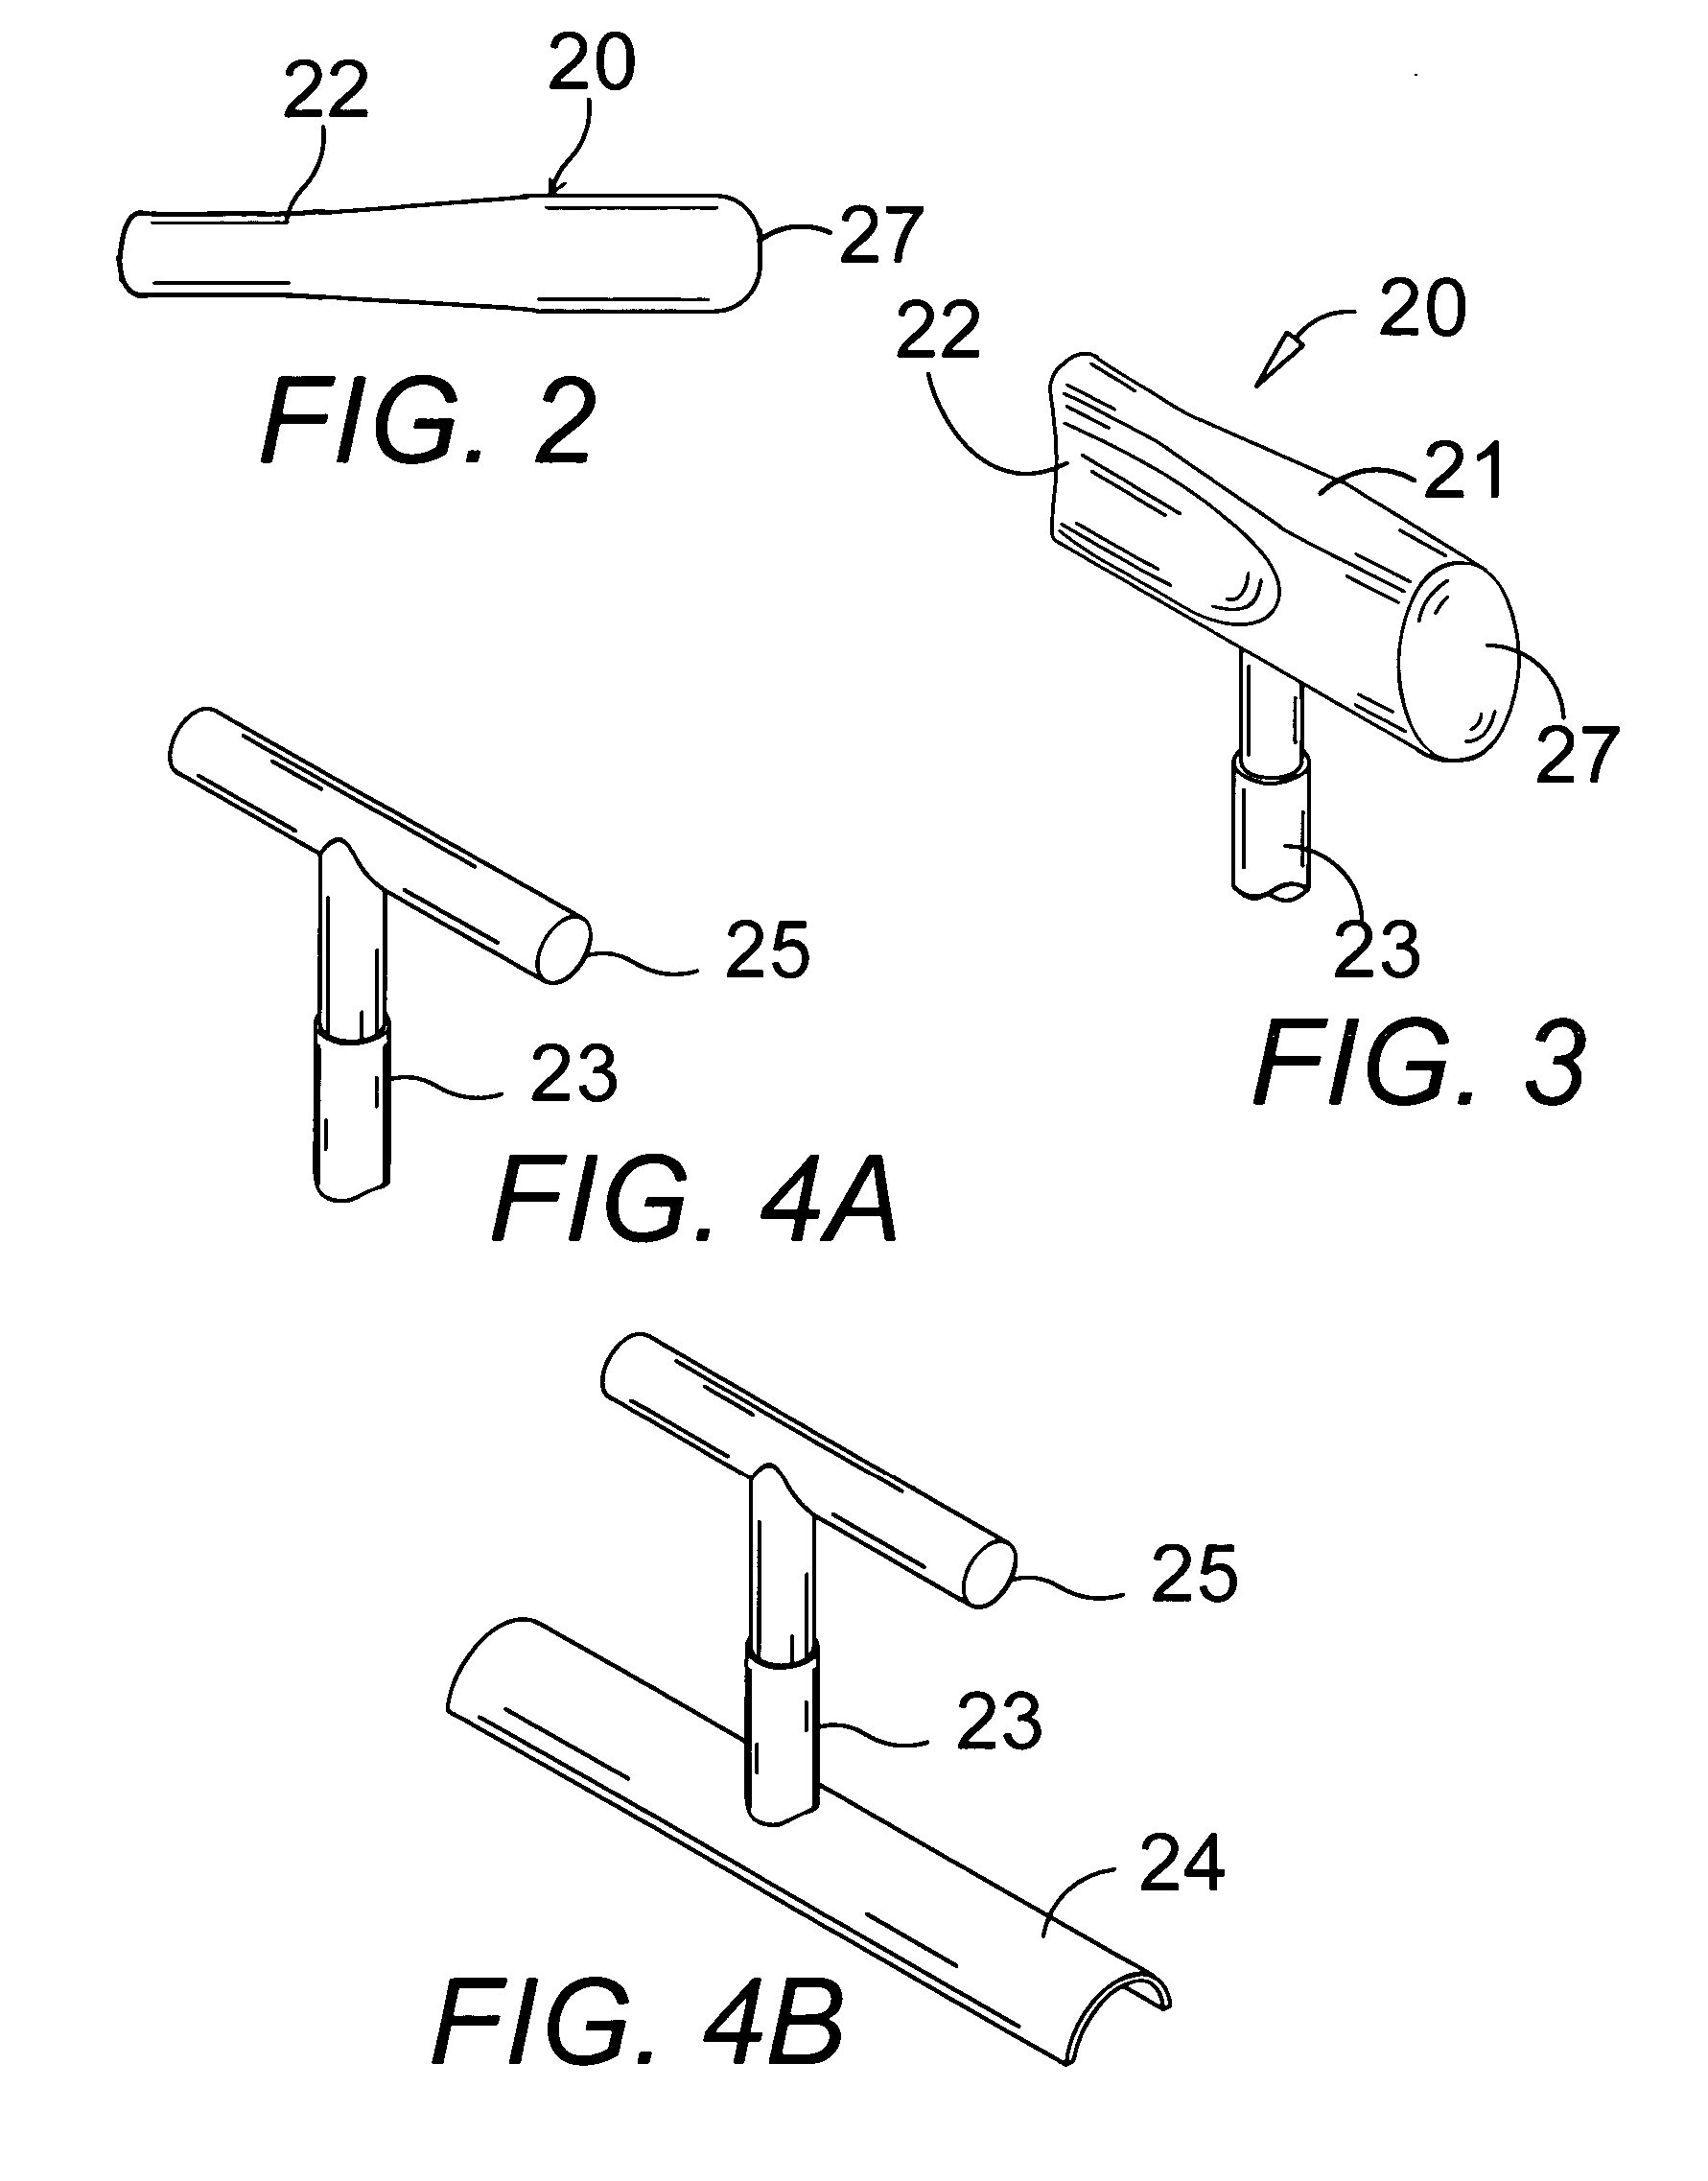 Auxiliary bicycle seat for stand-up uphill pedaling support